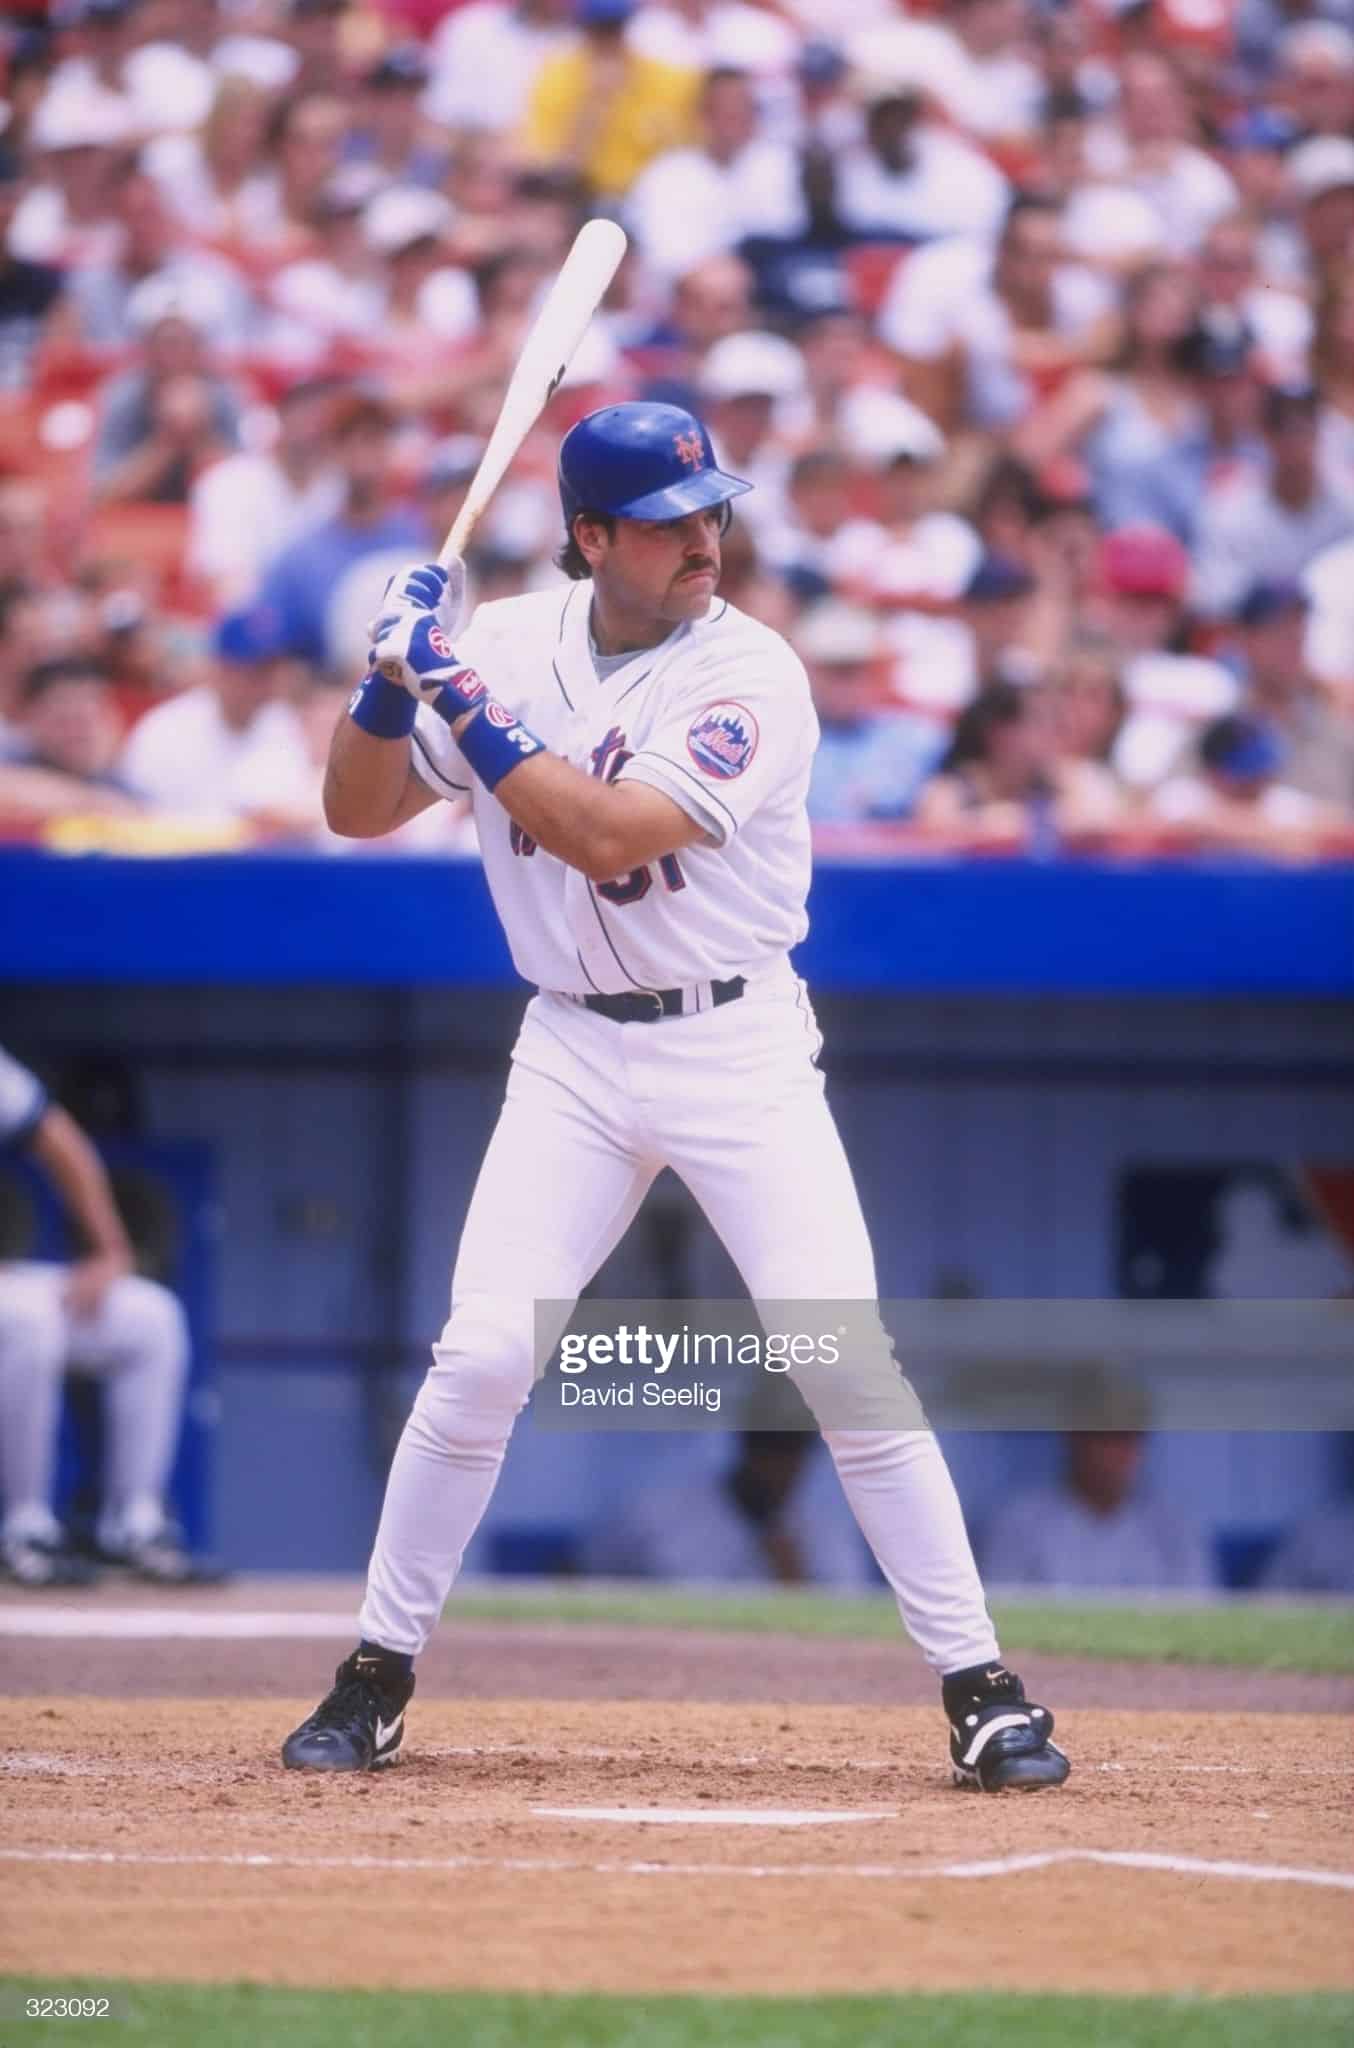 Former New York catcher Mike Piazza at bat against the Yankees on June 26, 1998